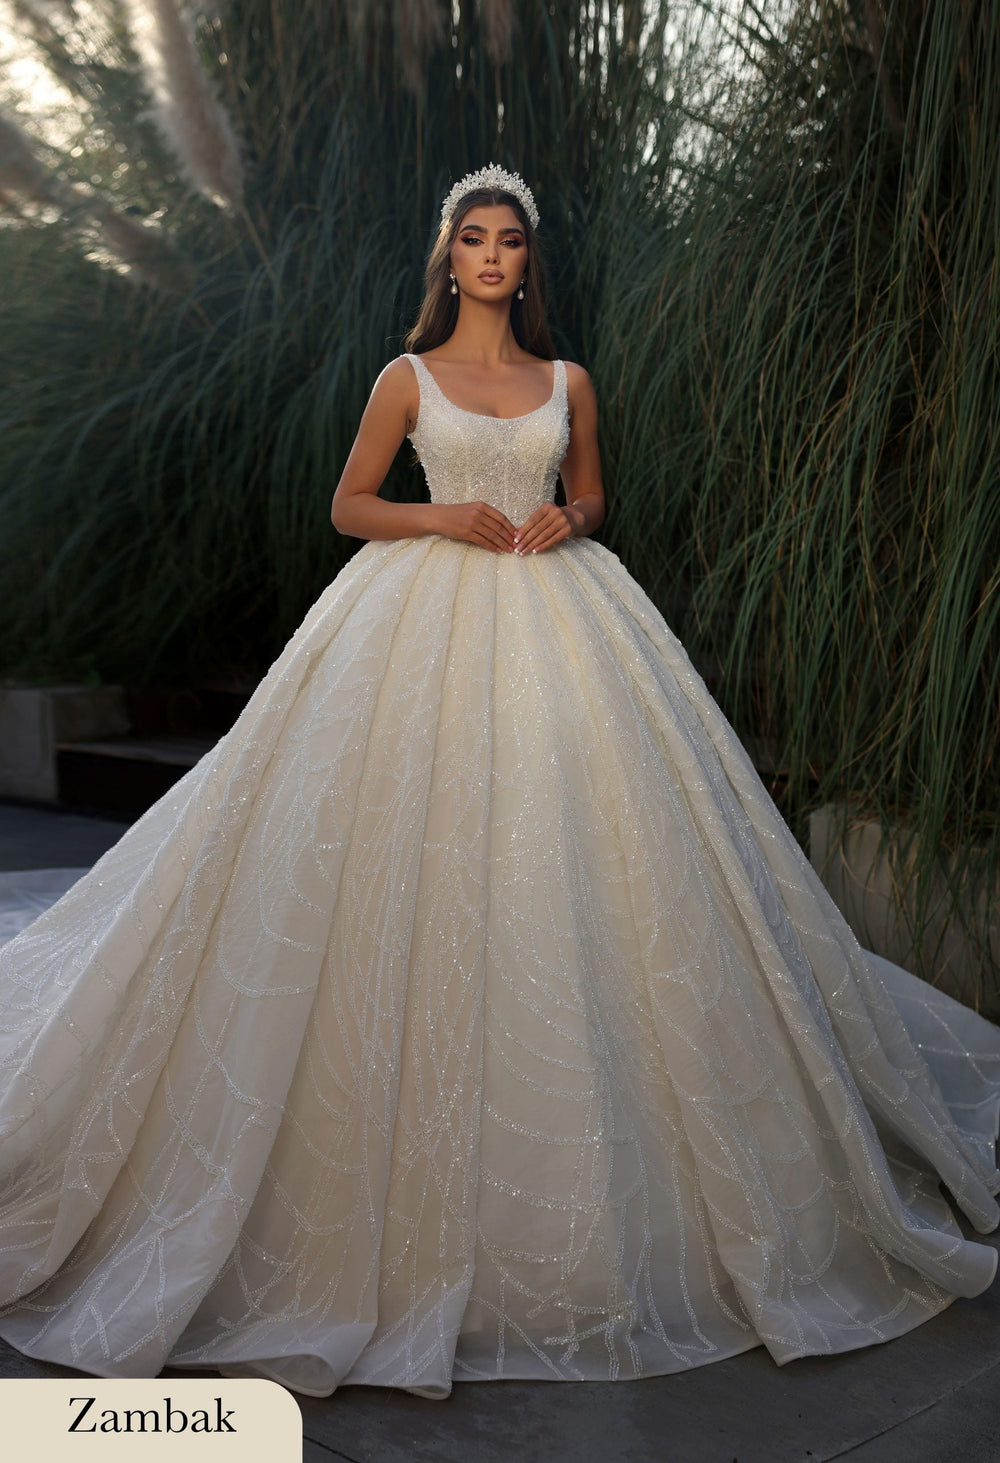 NorasBridalBoutiqueNY NorasBridalBoutiqueNY Bridal Appointment Scheduling Fee